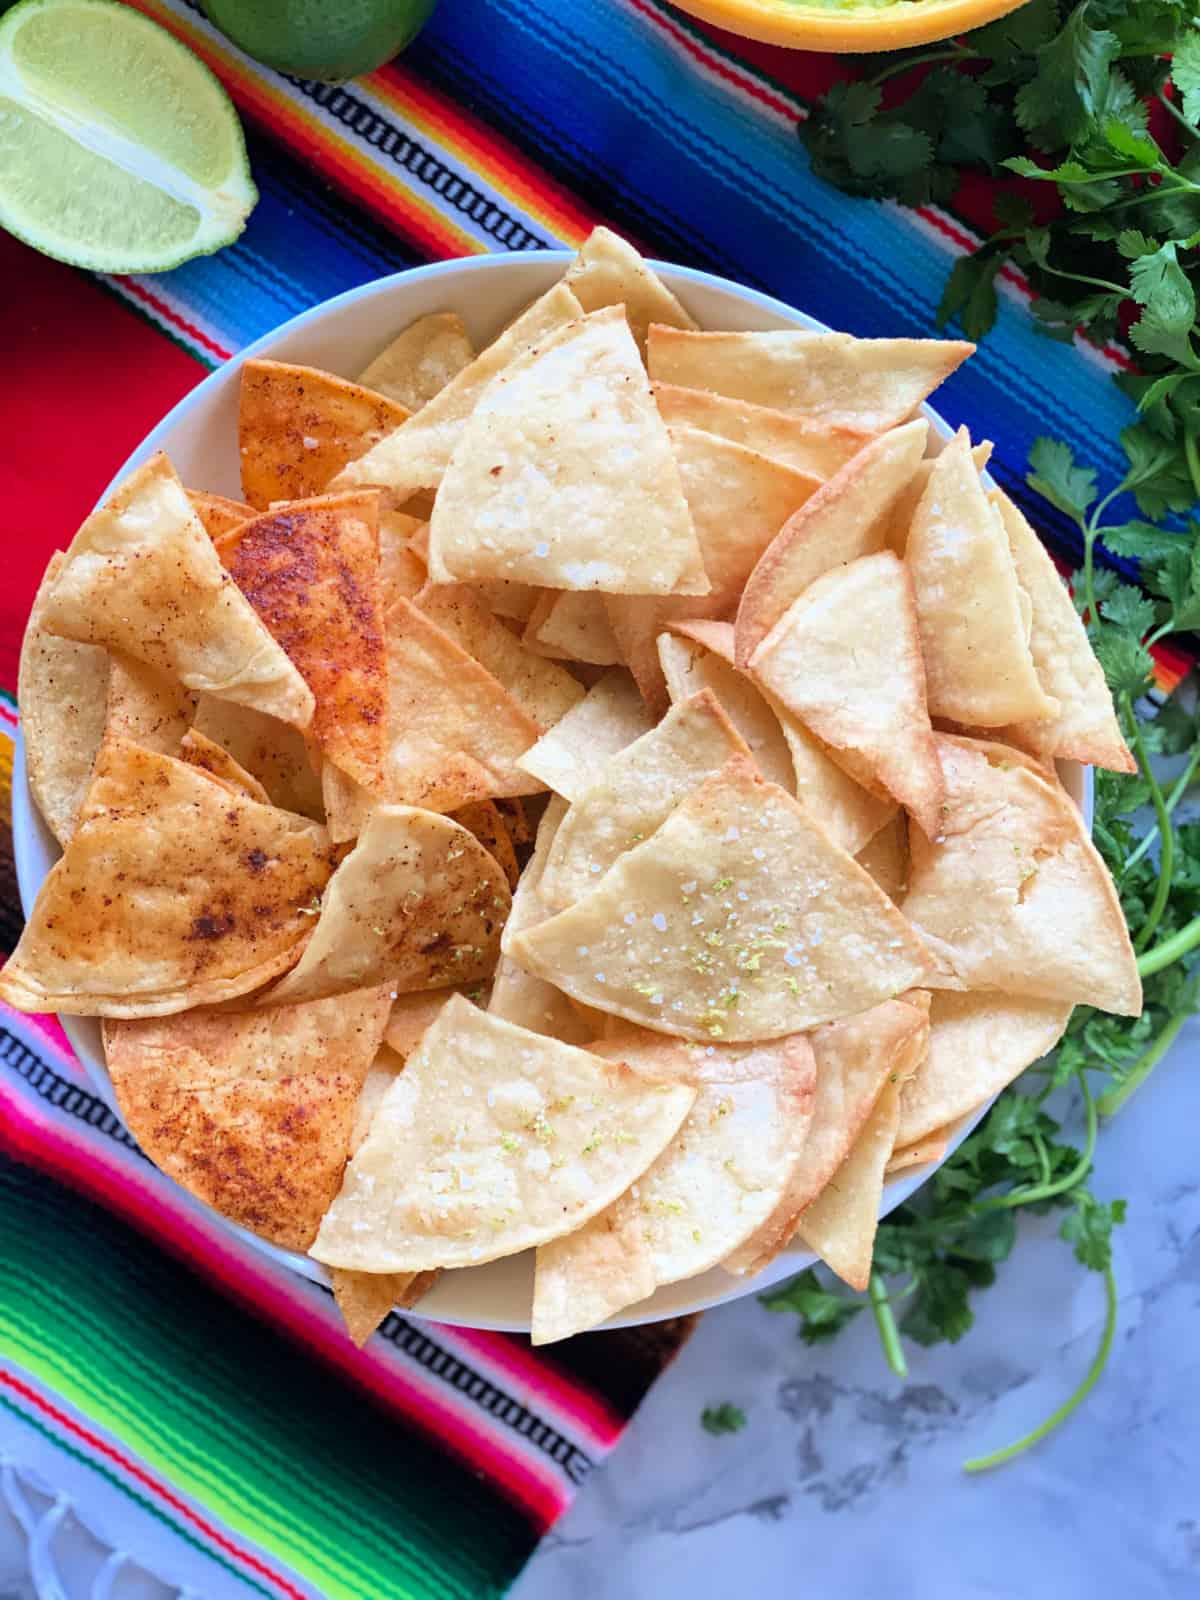 Corn tortilla chips with salt and other seasoning in a white bowl on a bright striped color cloth.